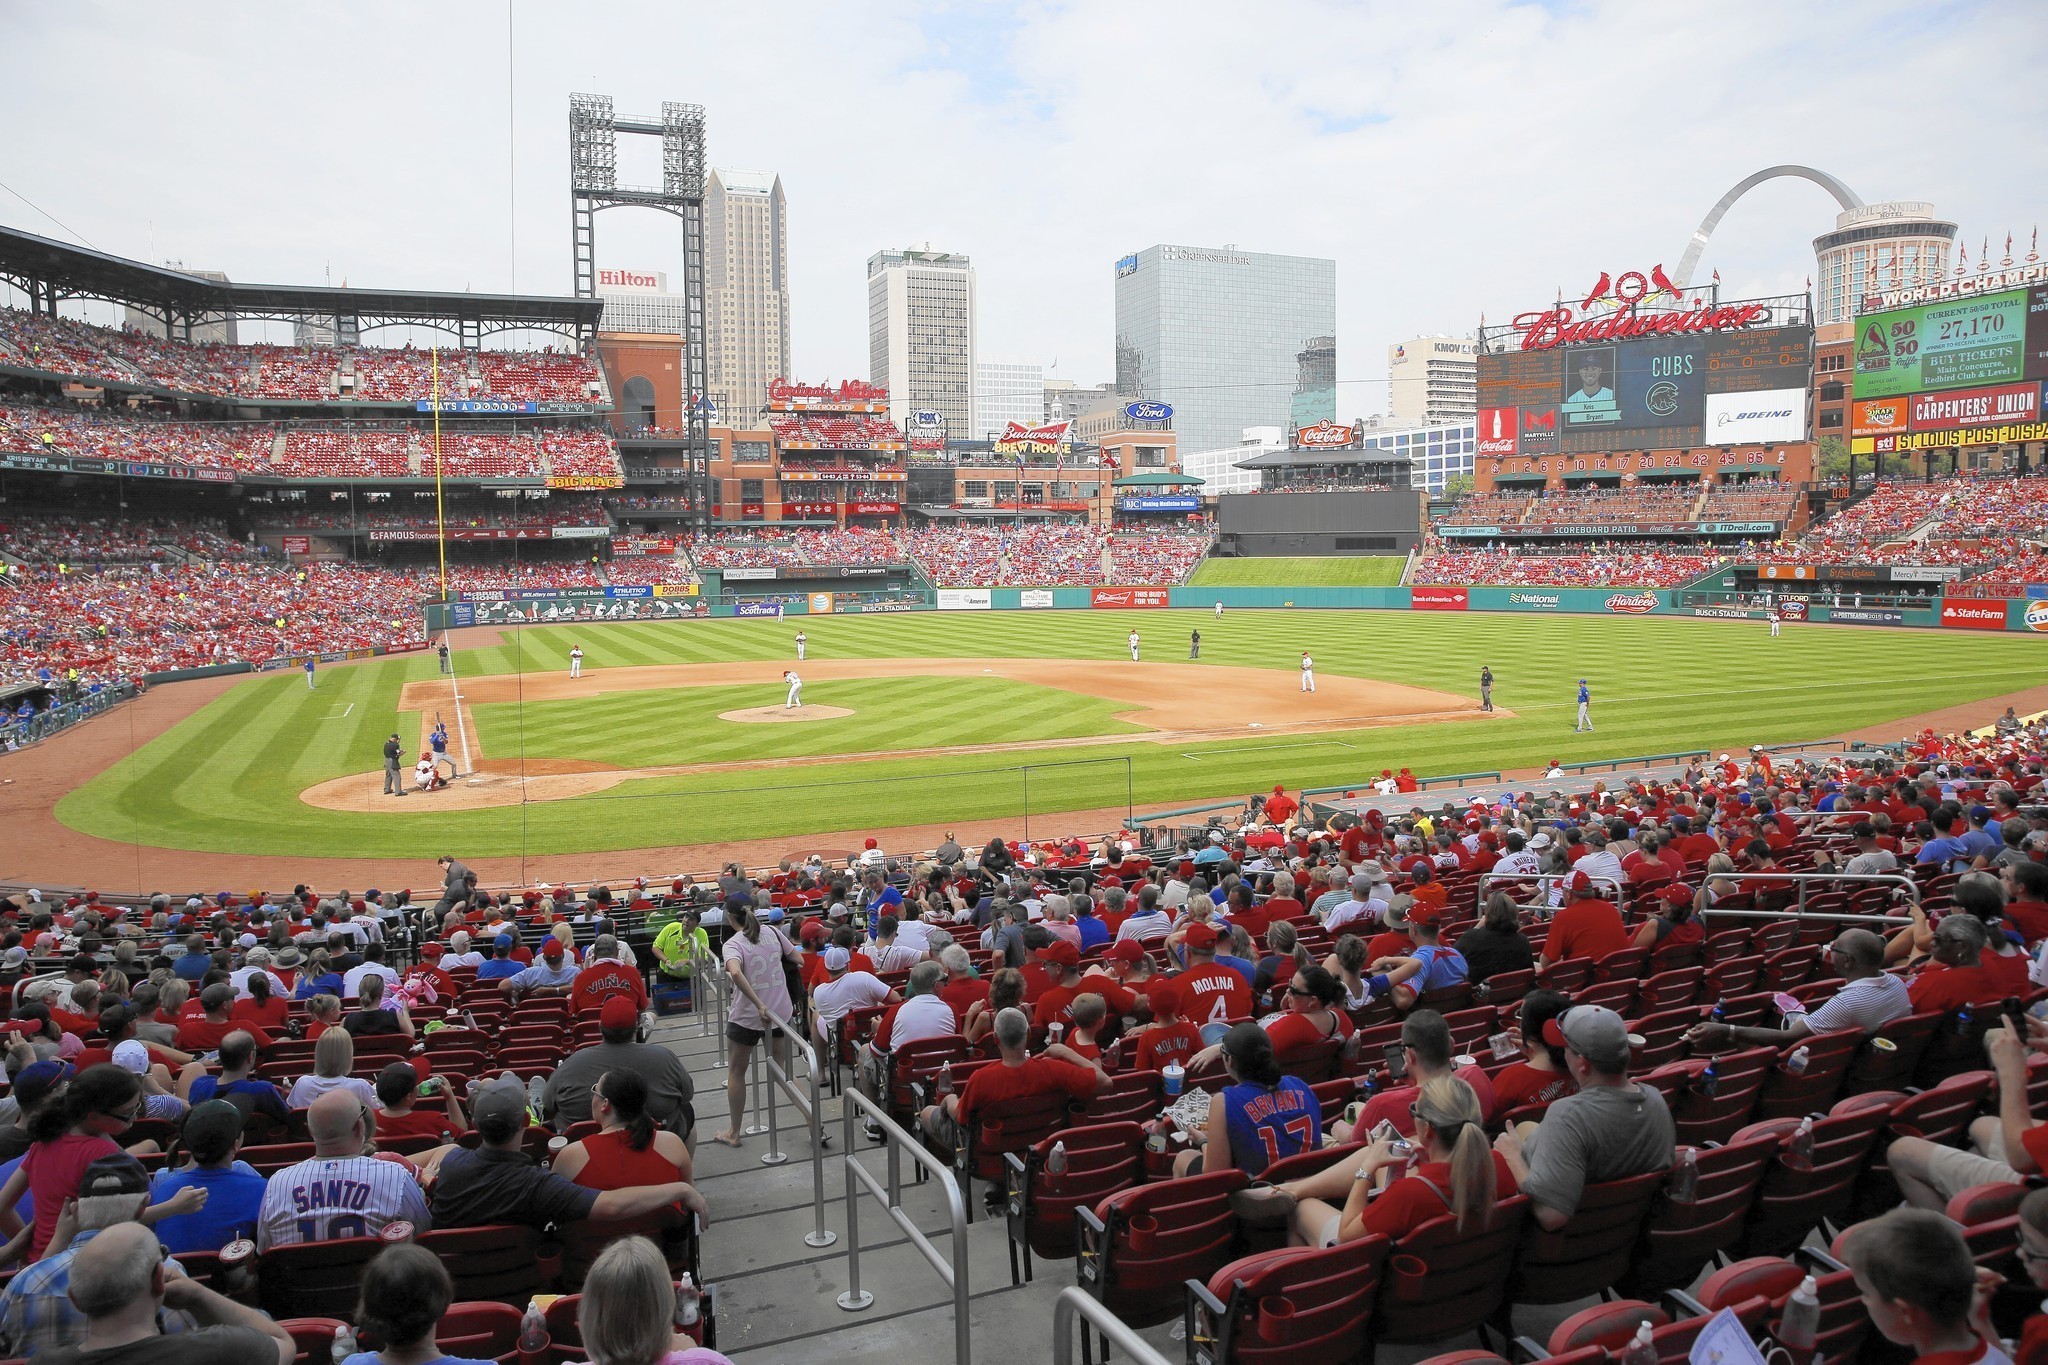 Road trip to St. Louis: The cost of a day at Busch Stadium - Chicago Tribune